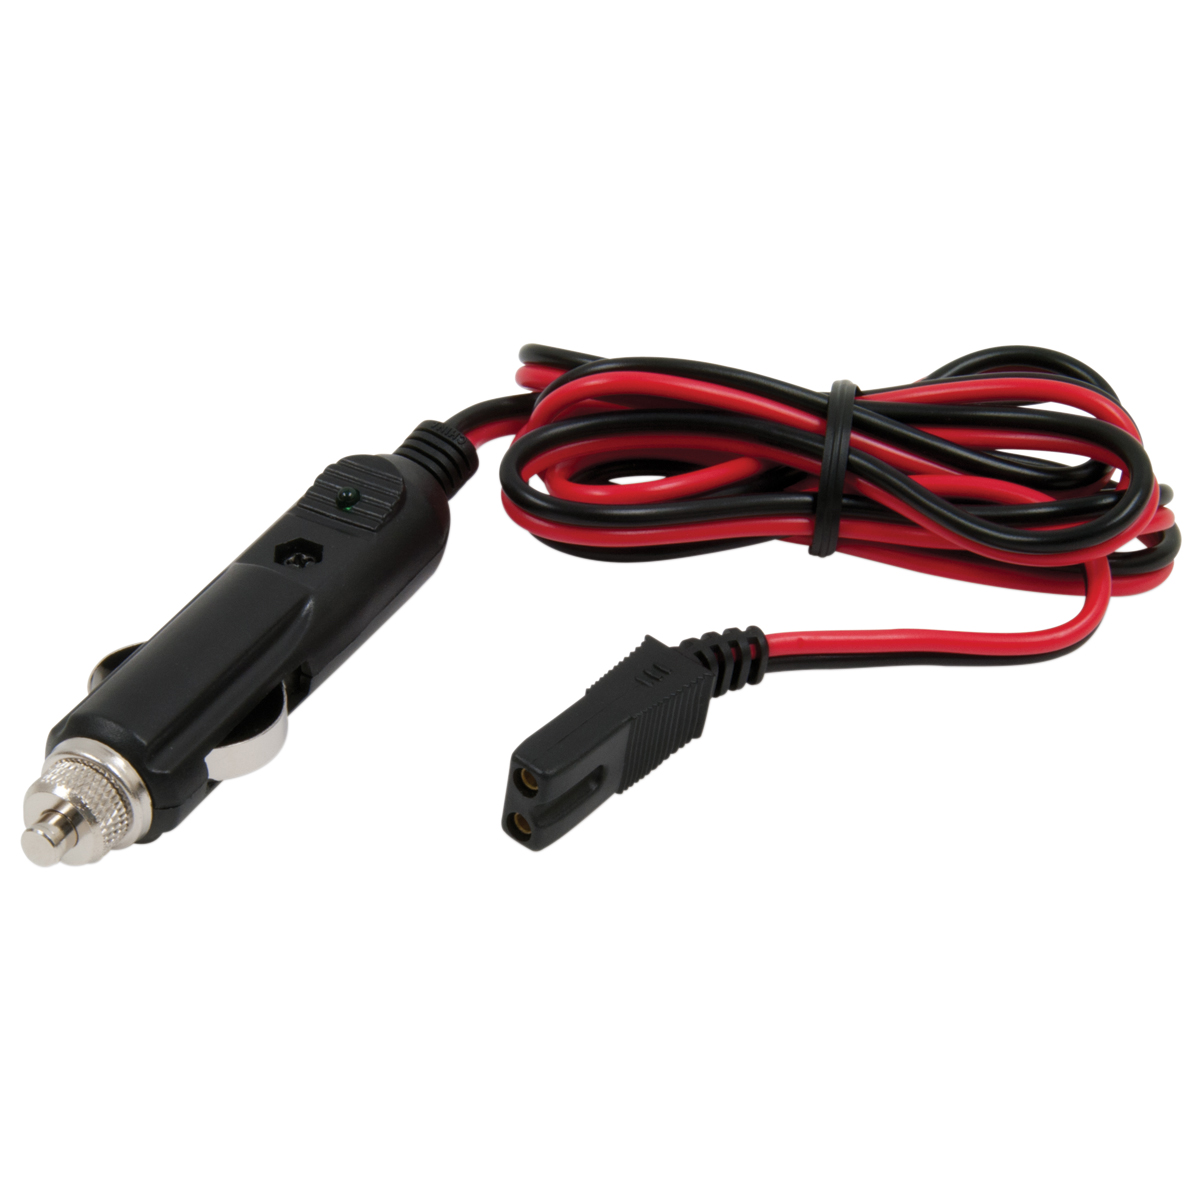 TruckSpec TSPSCBH-2BP 2-Pin 2-Wire CB Power Cord DC Replacement Power Cord with 12V Cigarette Lighter Plug for CB Radio